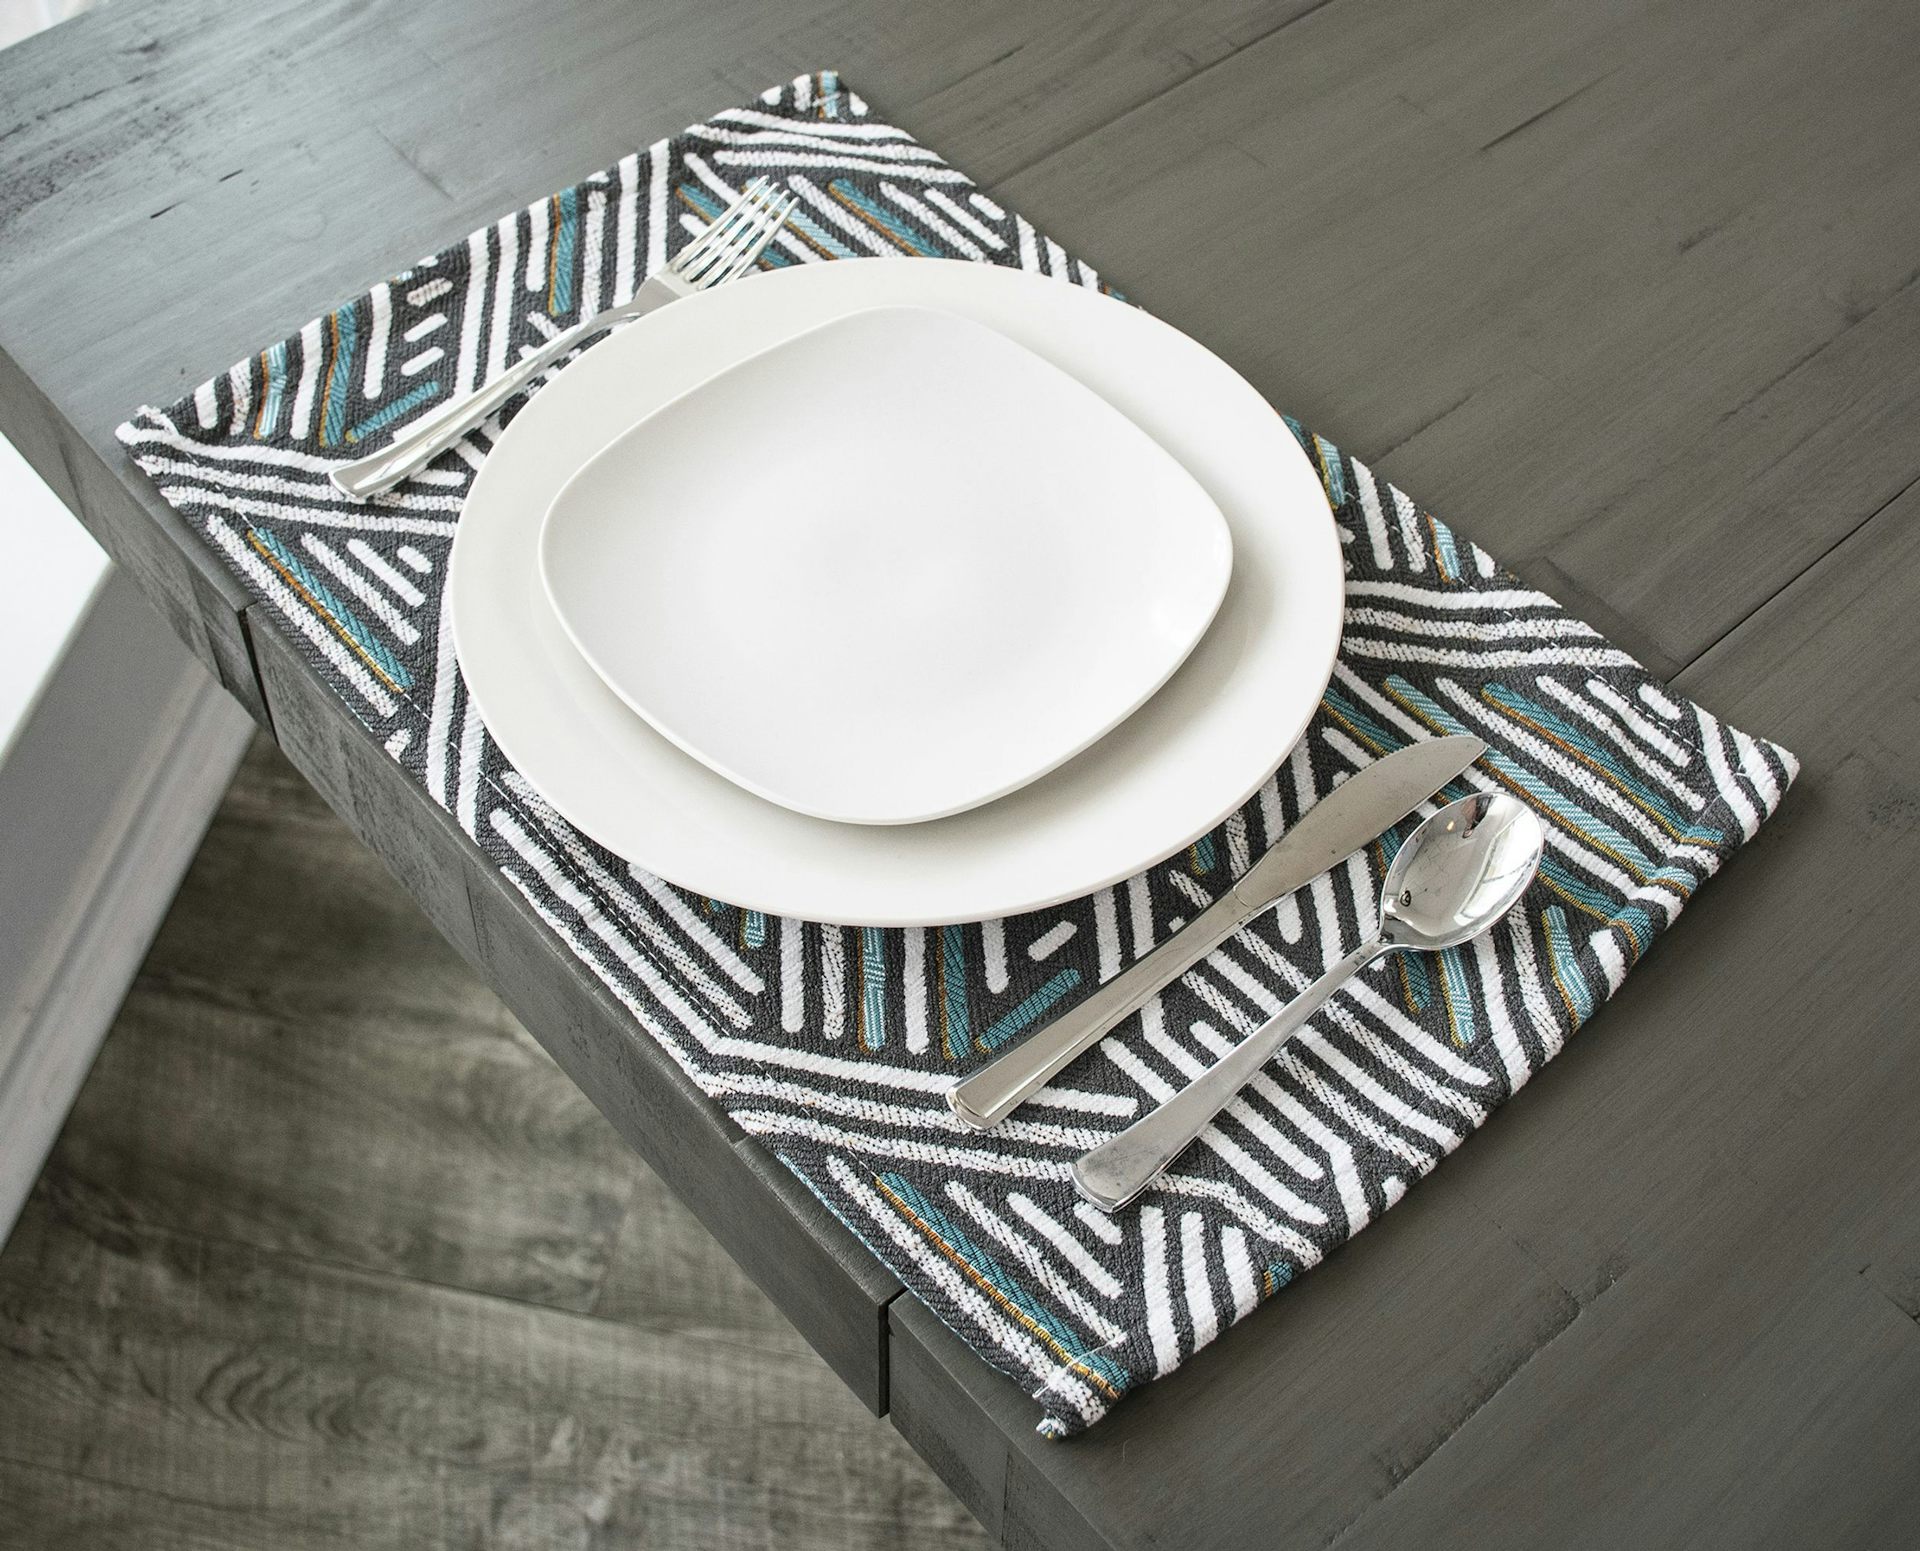 Weave Pattern Teal and Gray Placemat (12"x18")